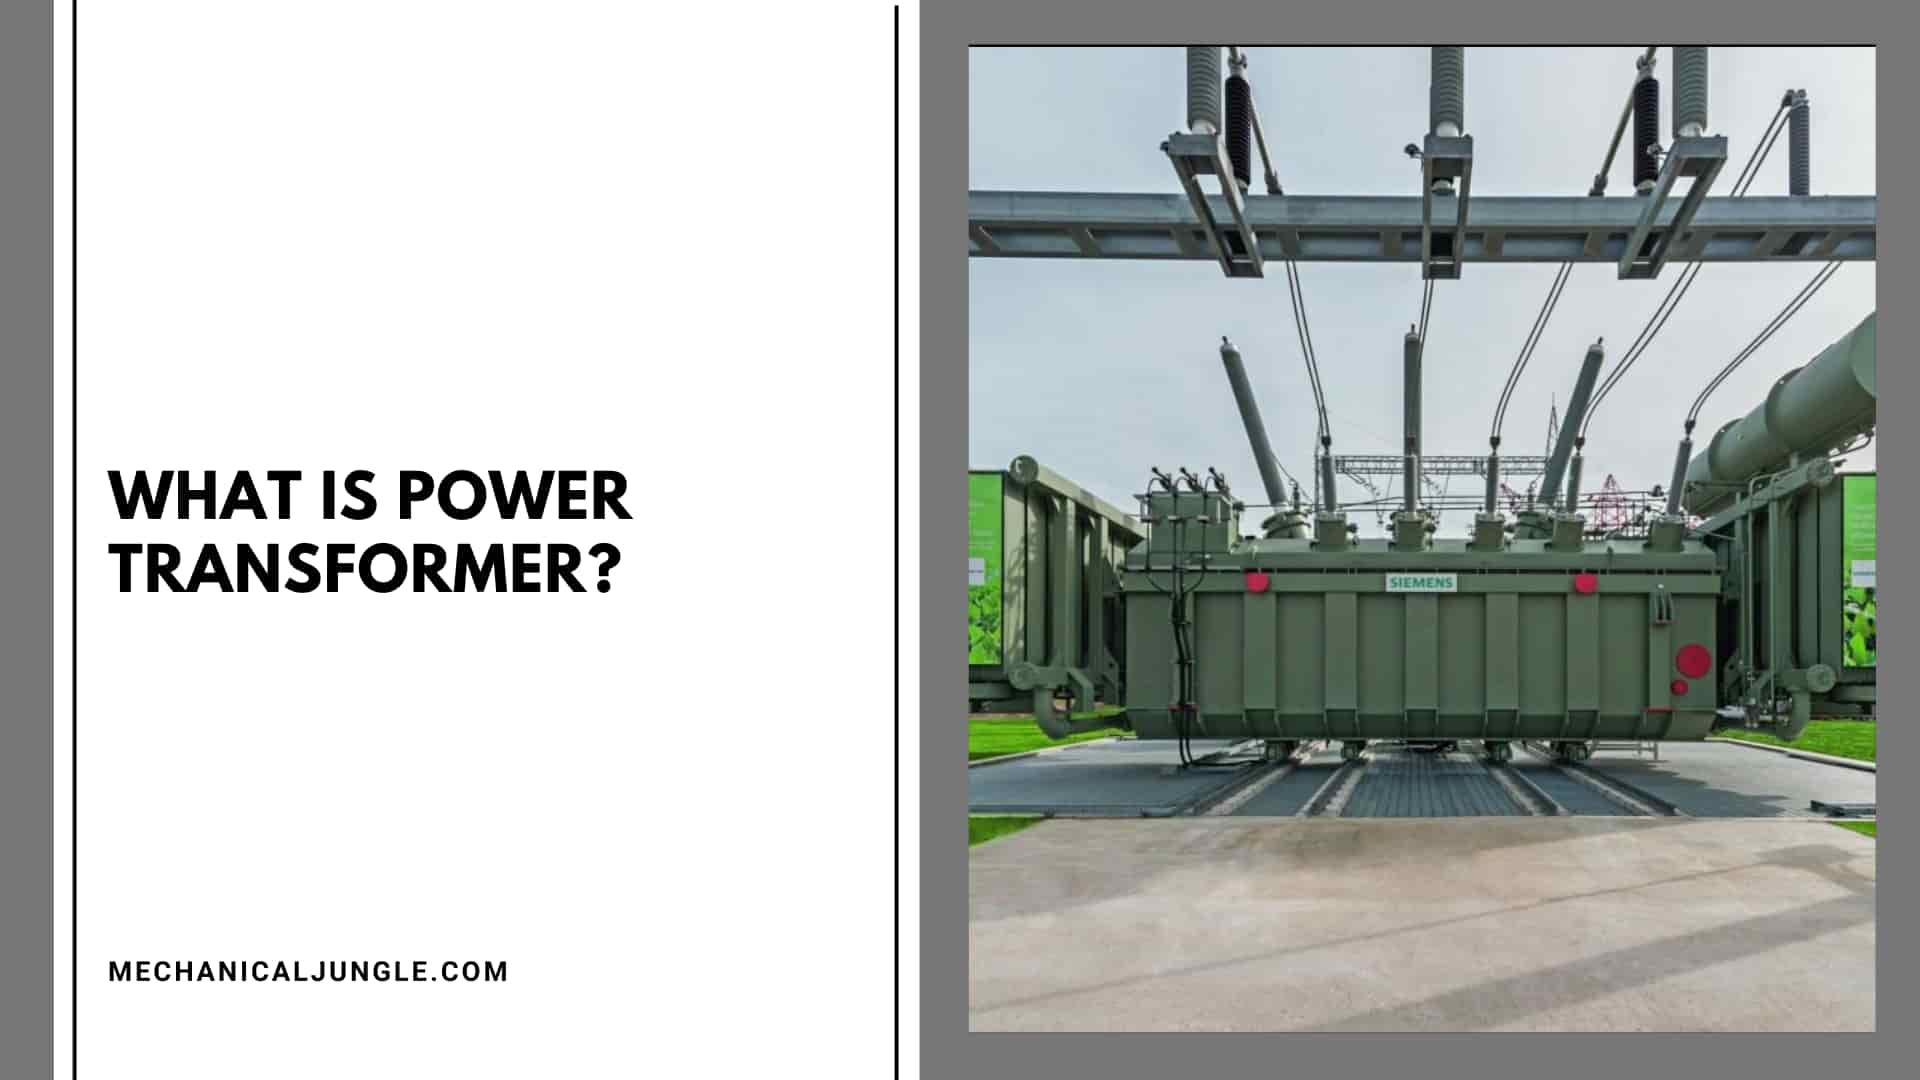 What Is Power Transformer?